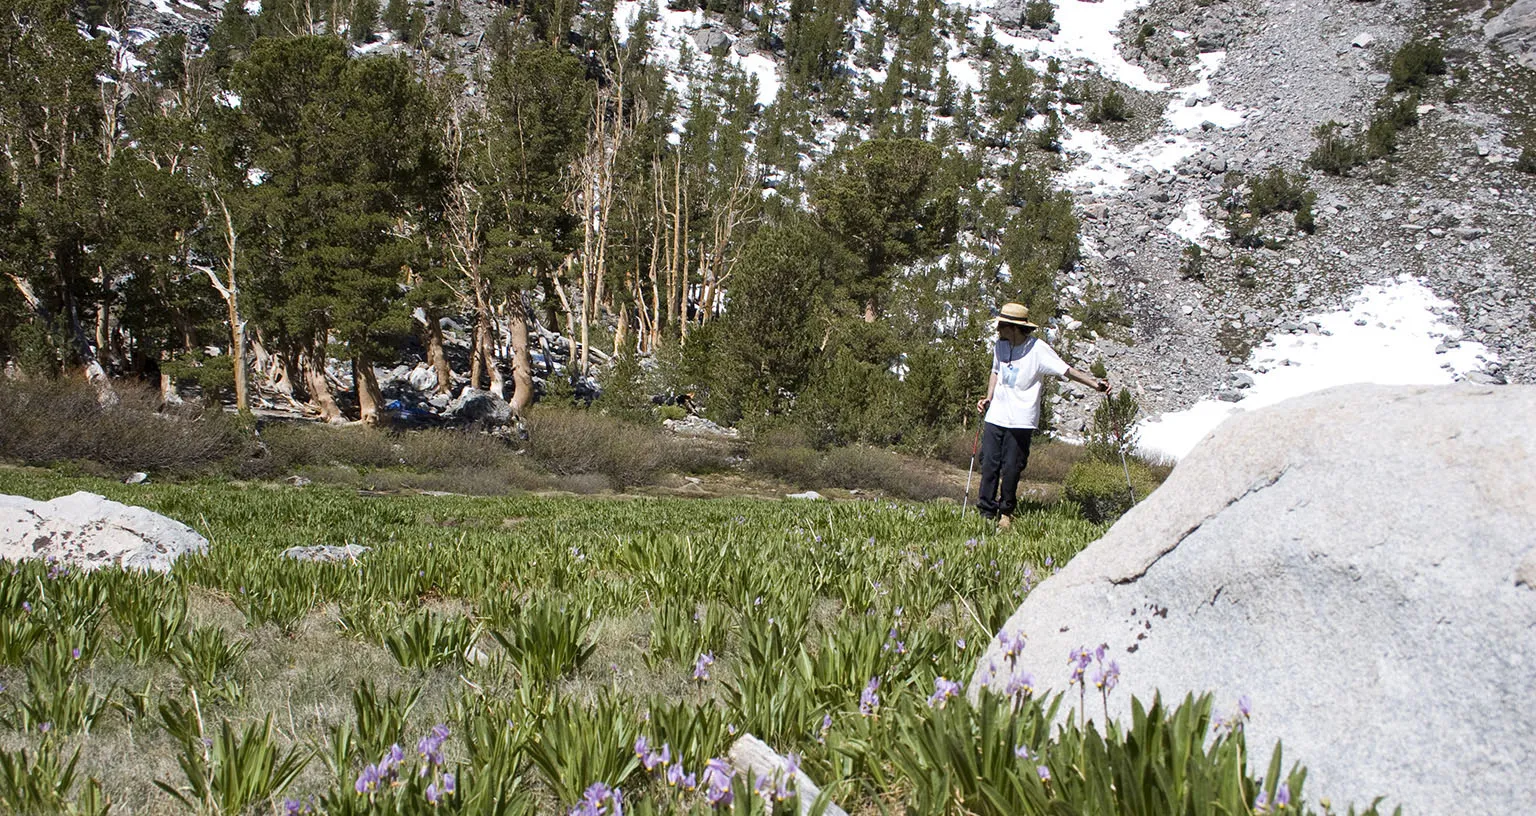 Golden Trout Meadows, wildflowers, and our tent in the background